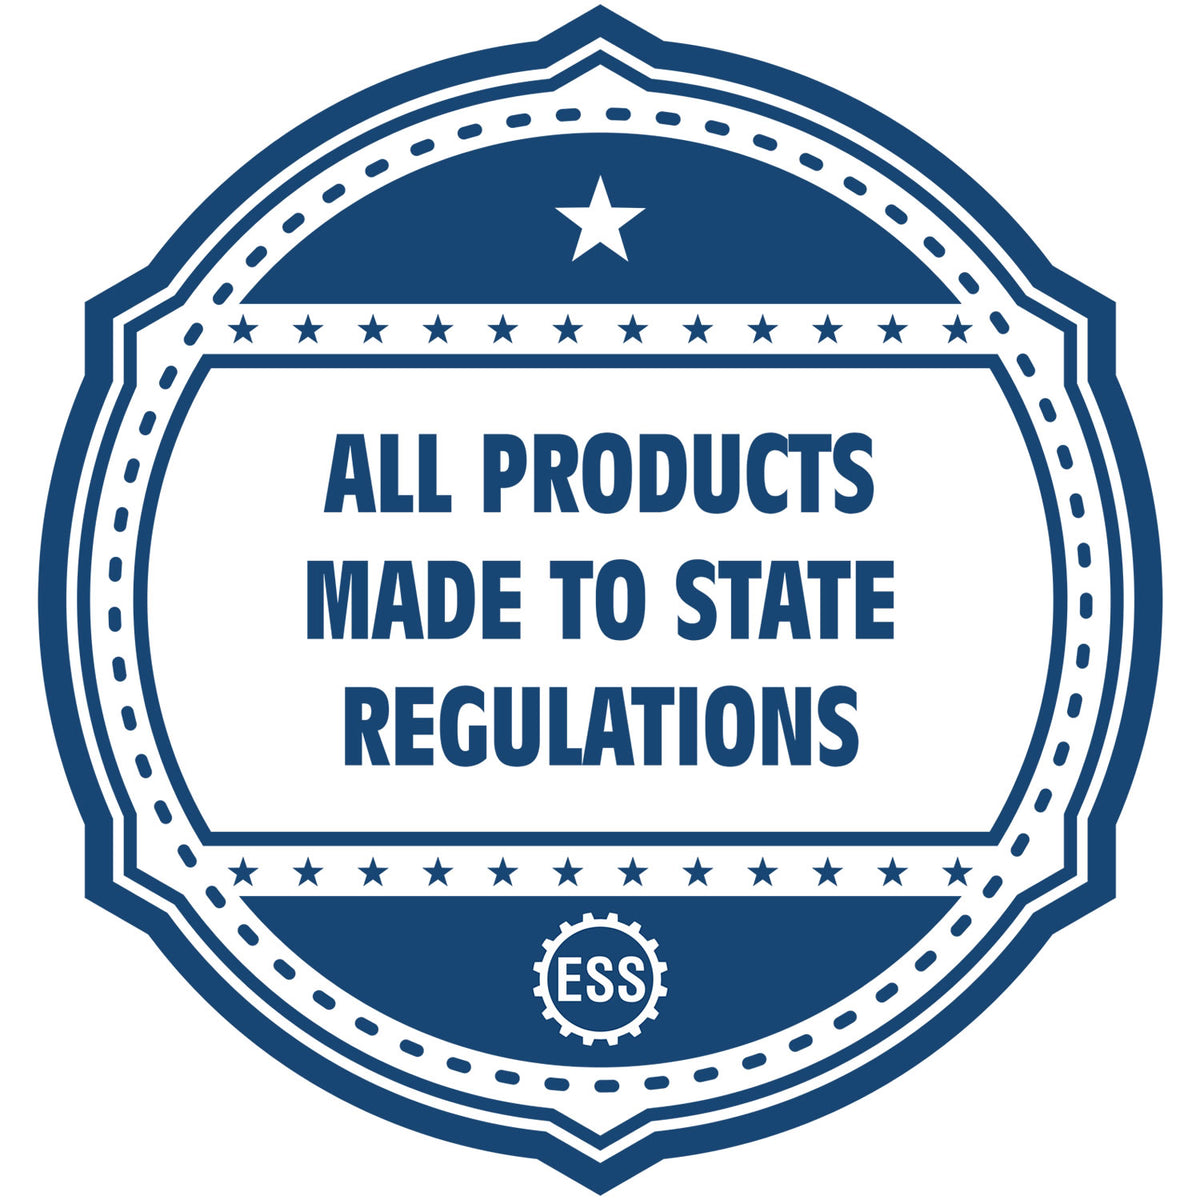 A blue icon or badge for the Hybrid New Mexico Engineer Seal showing that this product is made in compliance with state regulations.